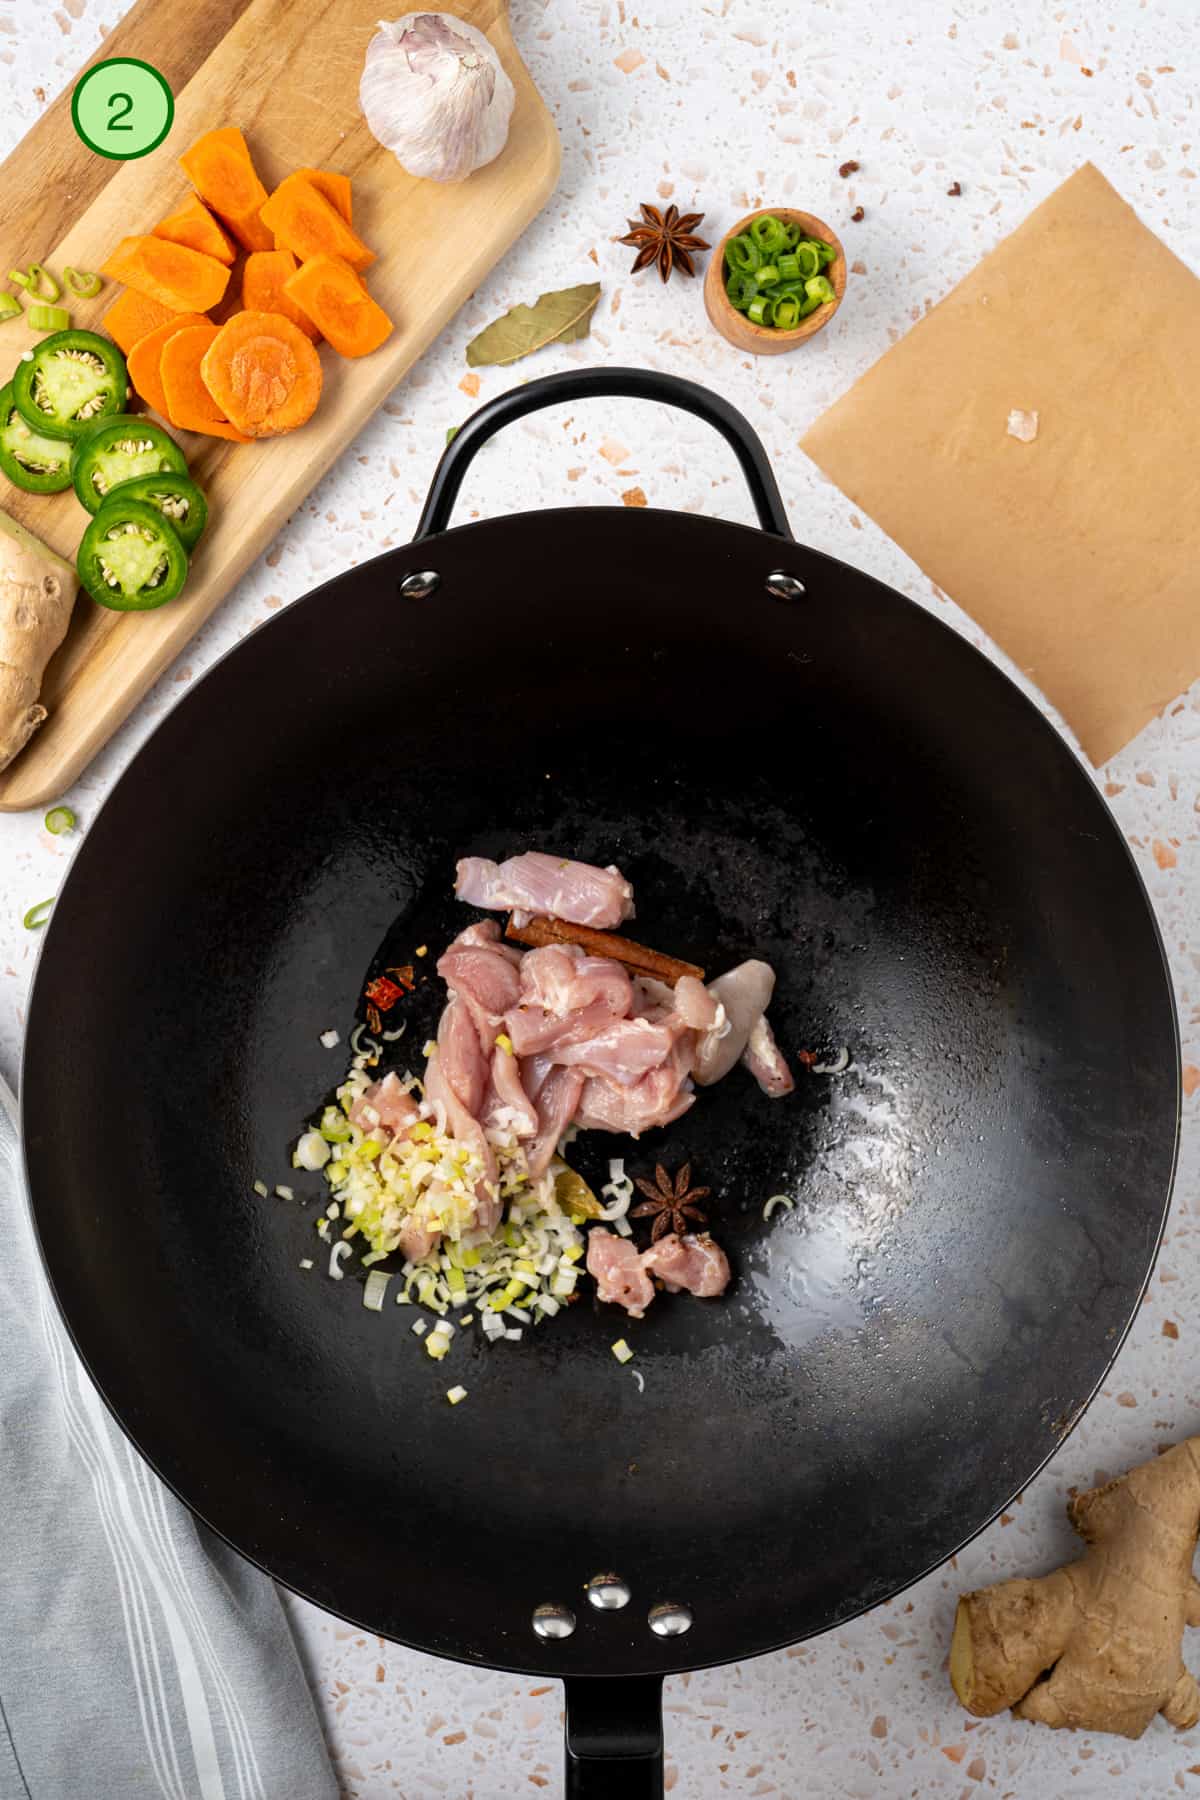 Sauté the aromatics and chicken in the wok.